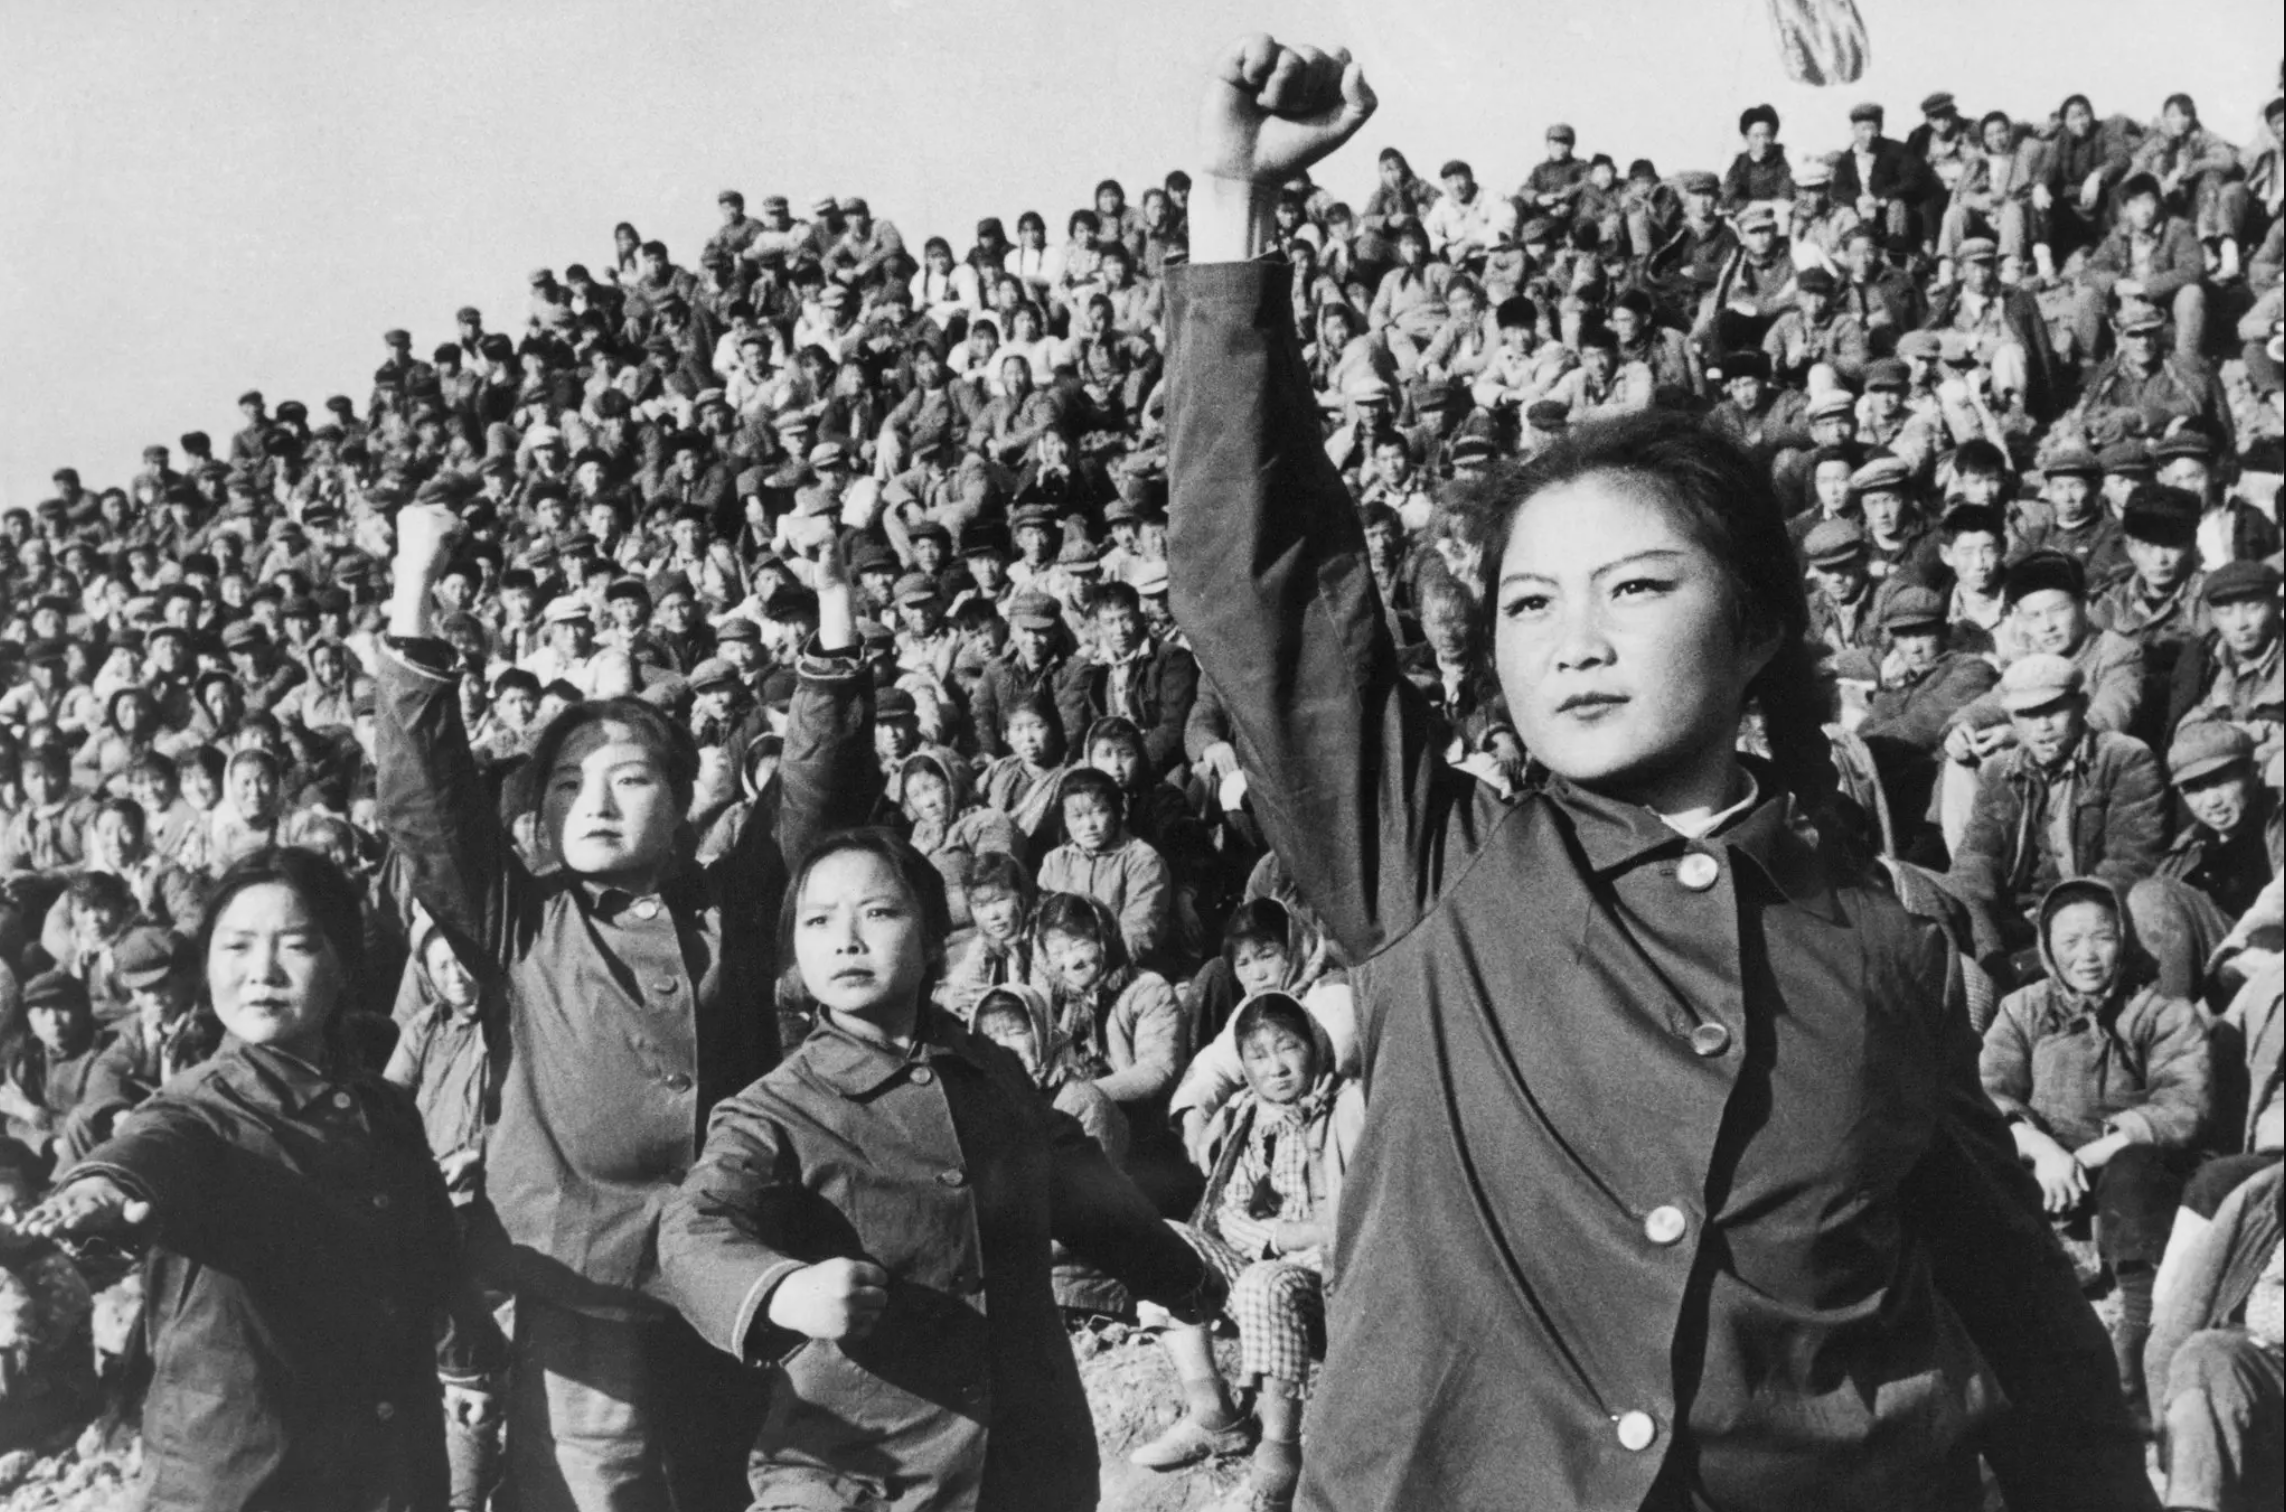    Members of a commune in Jiangsu Province taking part in a rally in 1974 criticizing the philosopher Confucius ©Bettmann via Getty Images   